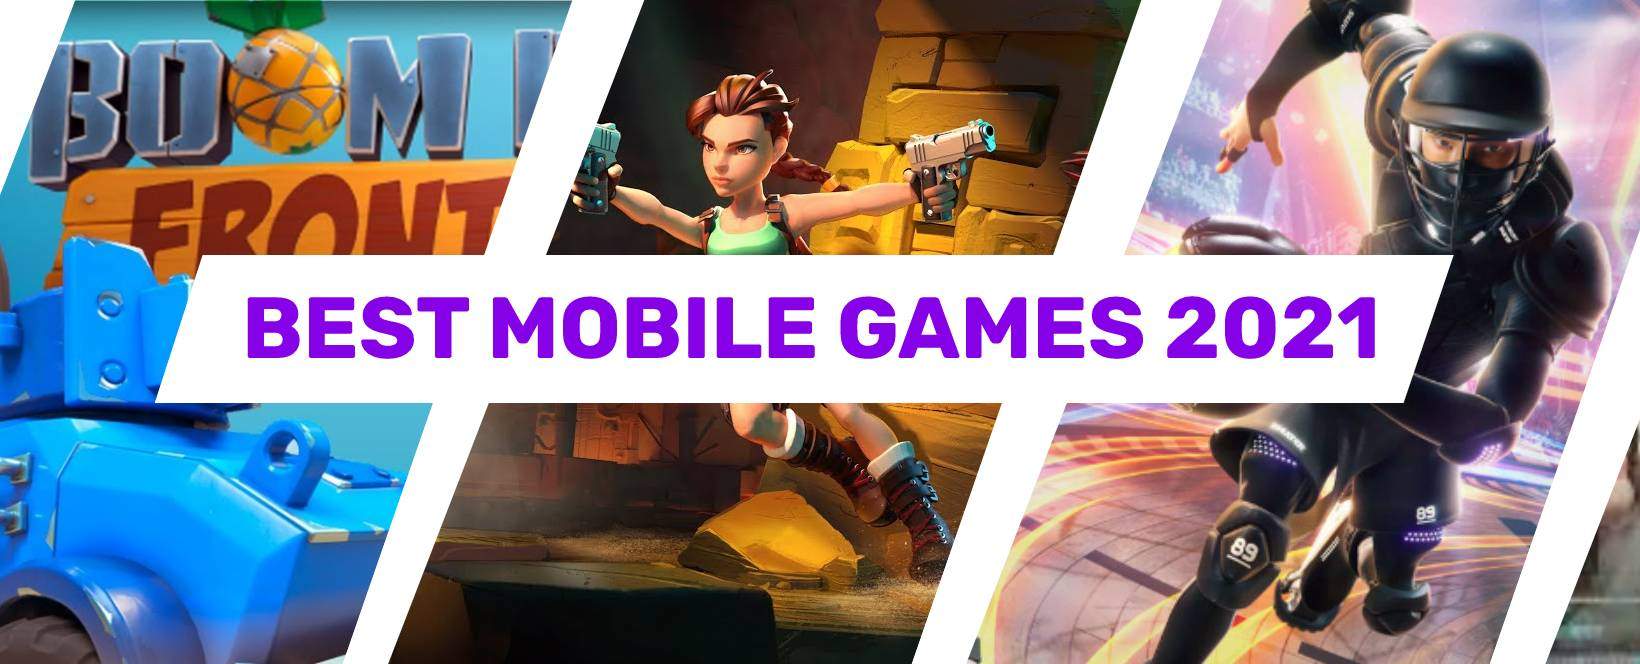 Best mobile games coming on mobile in 2021